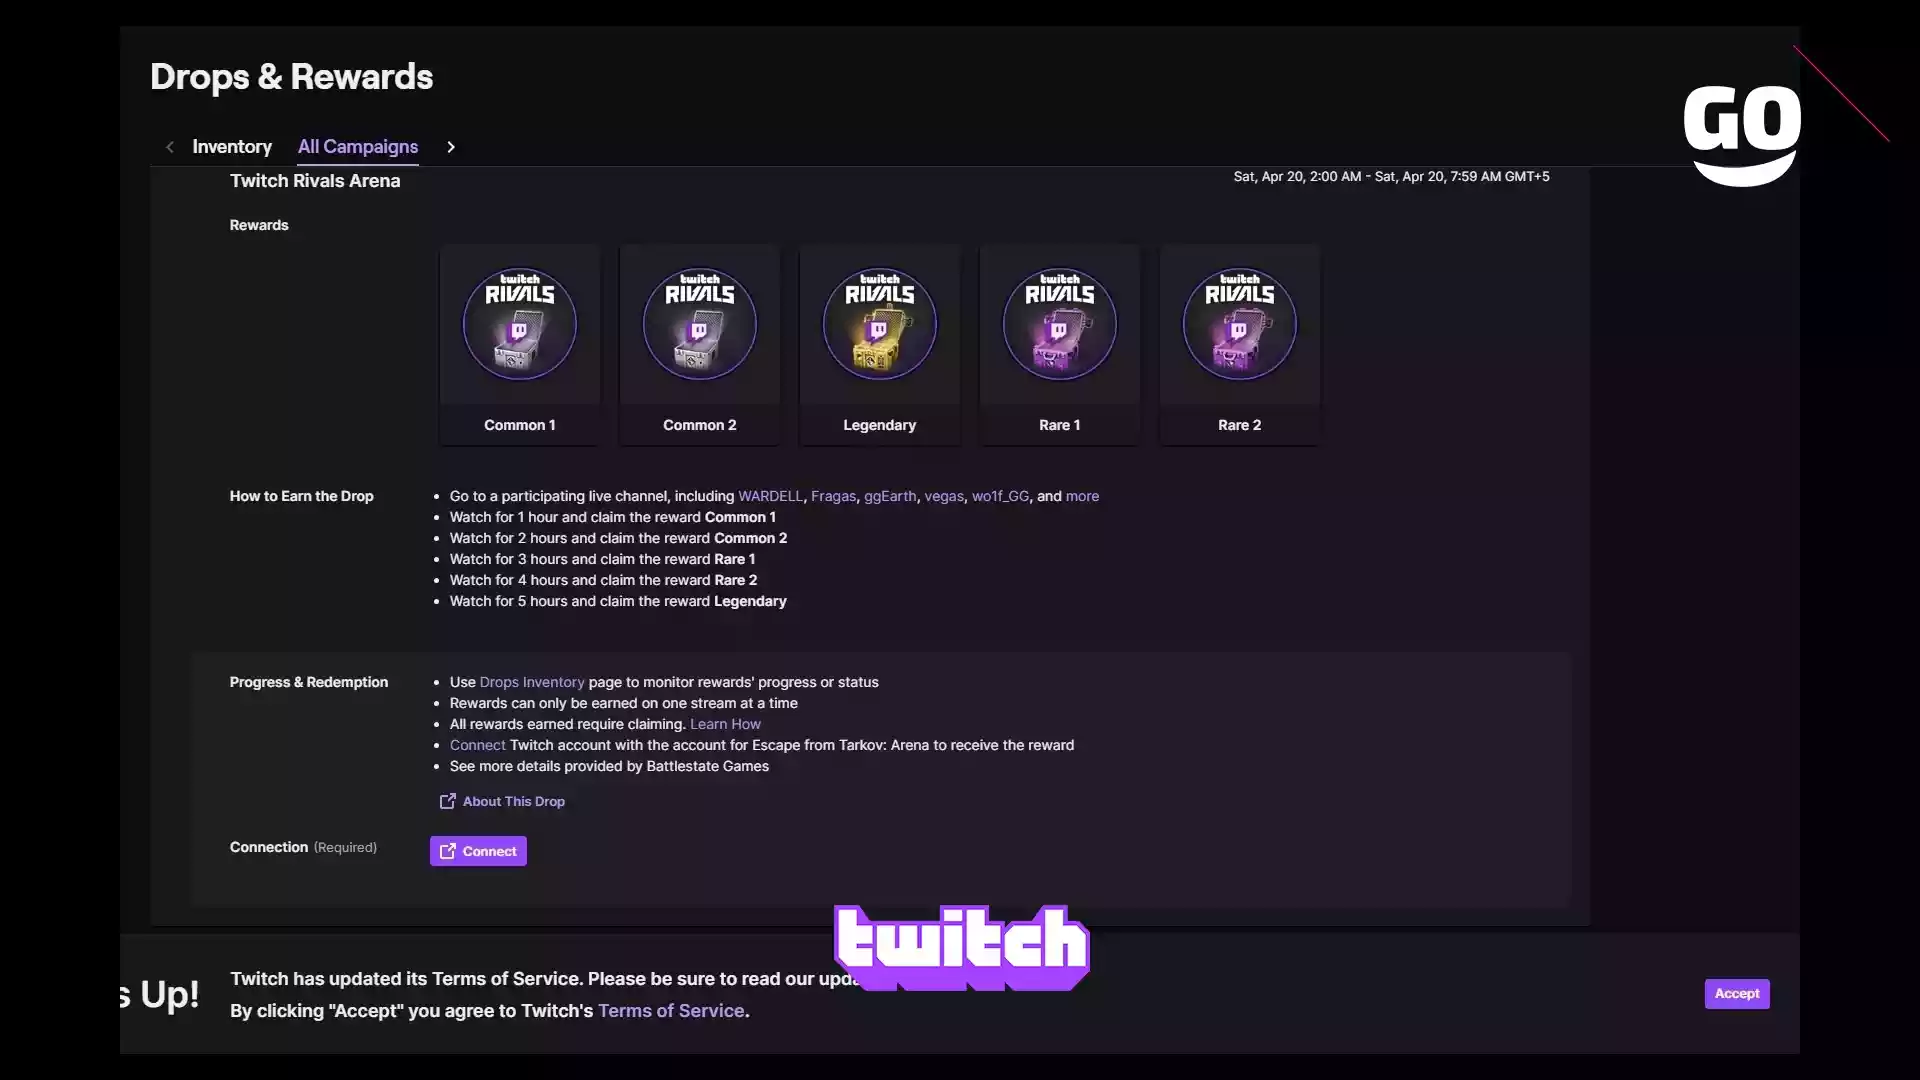 Twitch Rivals Arena